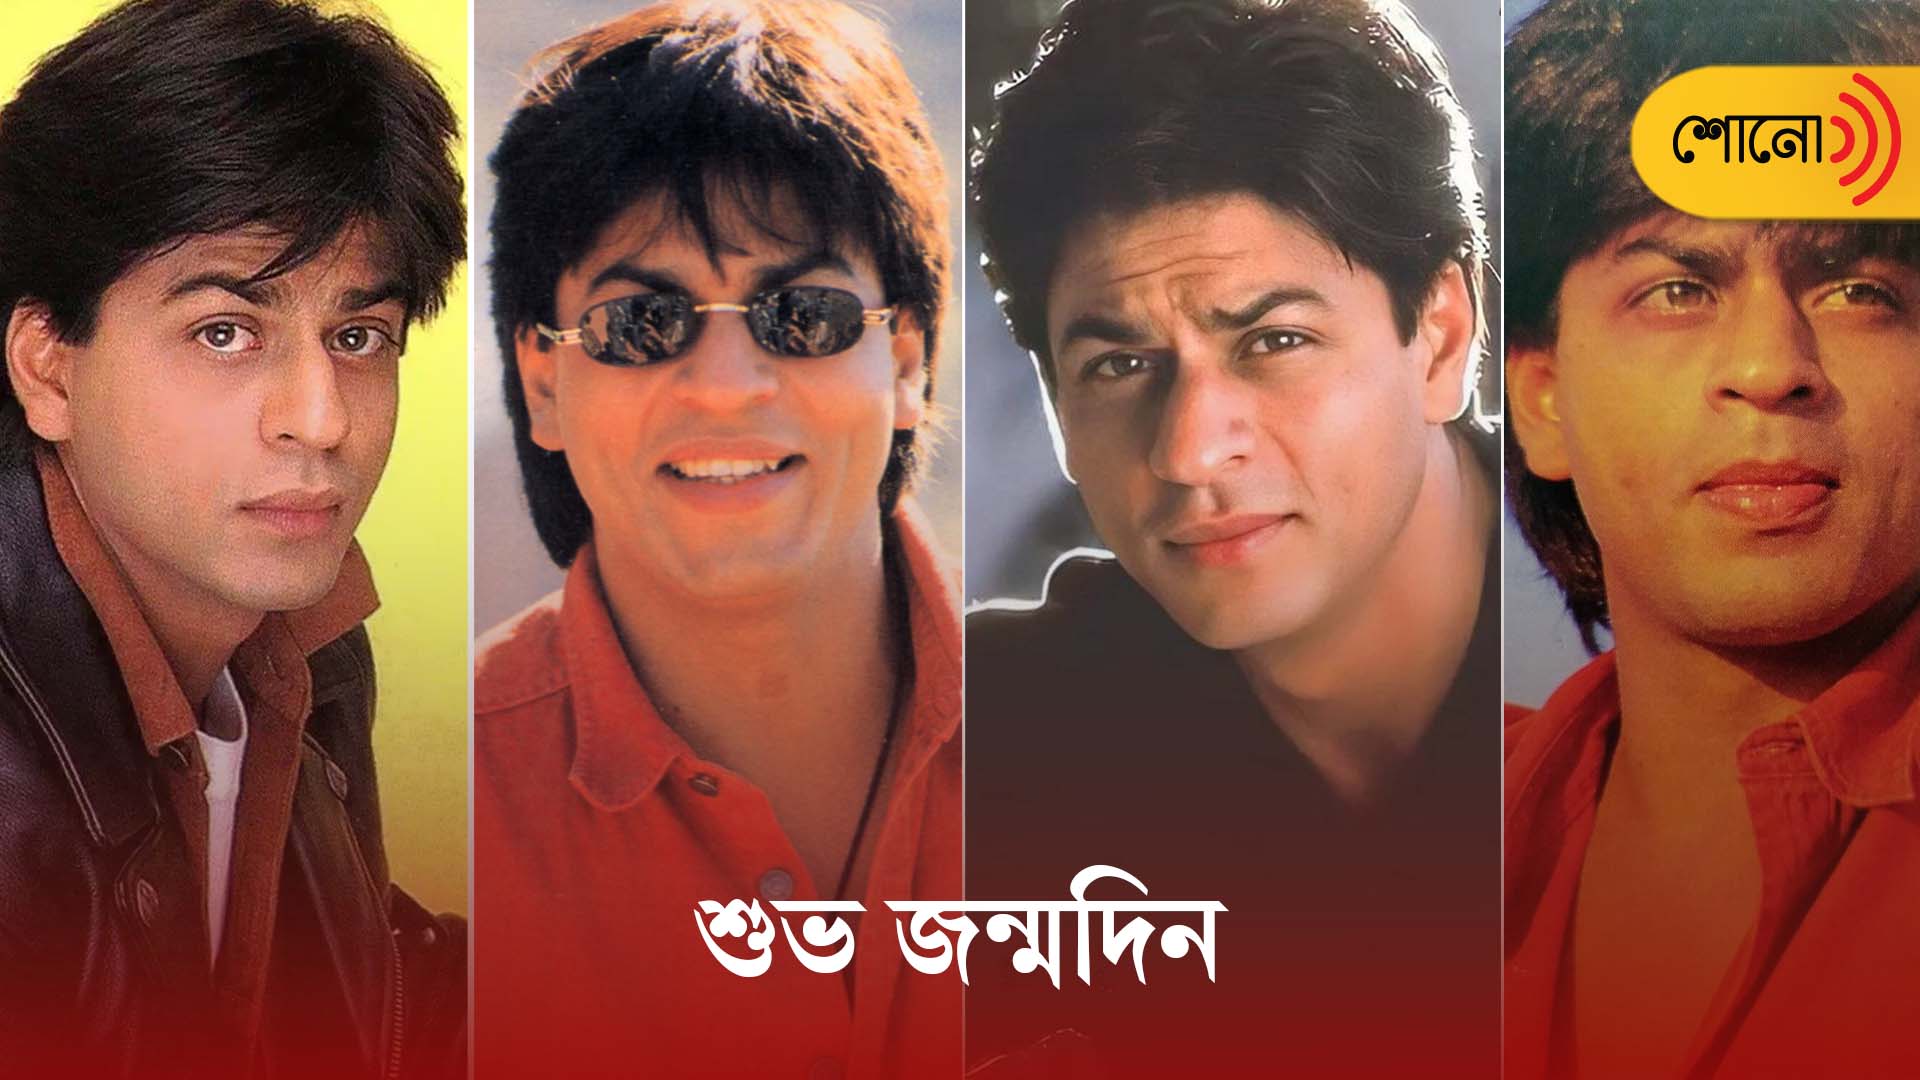 Shah Rukh Khan: a name to remember always